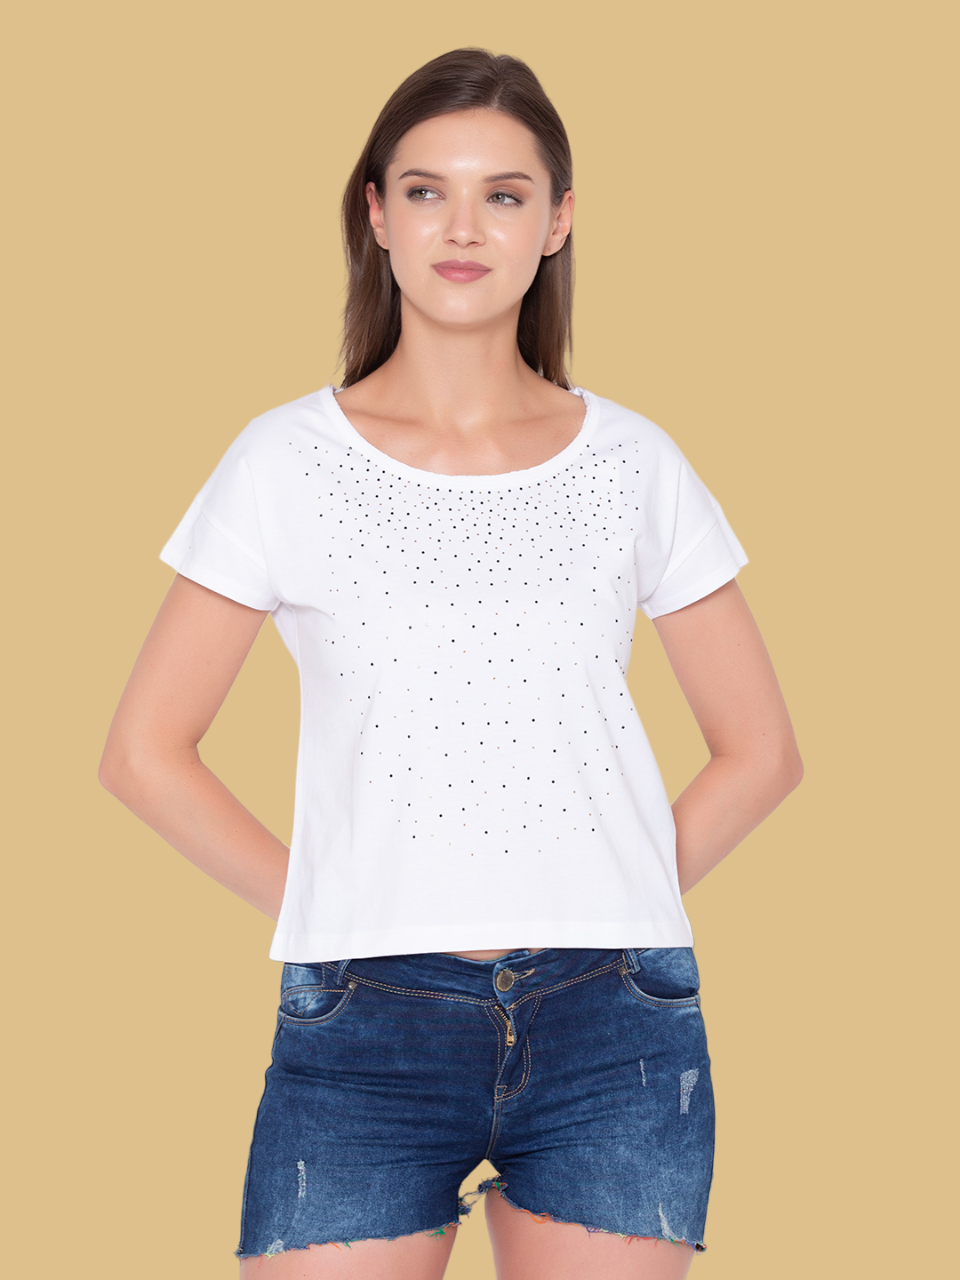 Flawless Winged White Top For Women Being Flawless